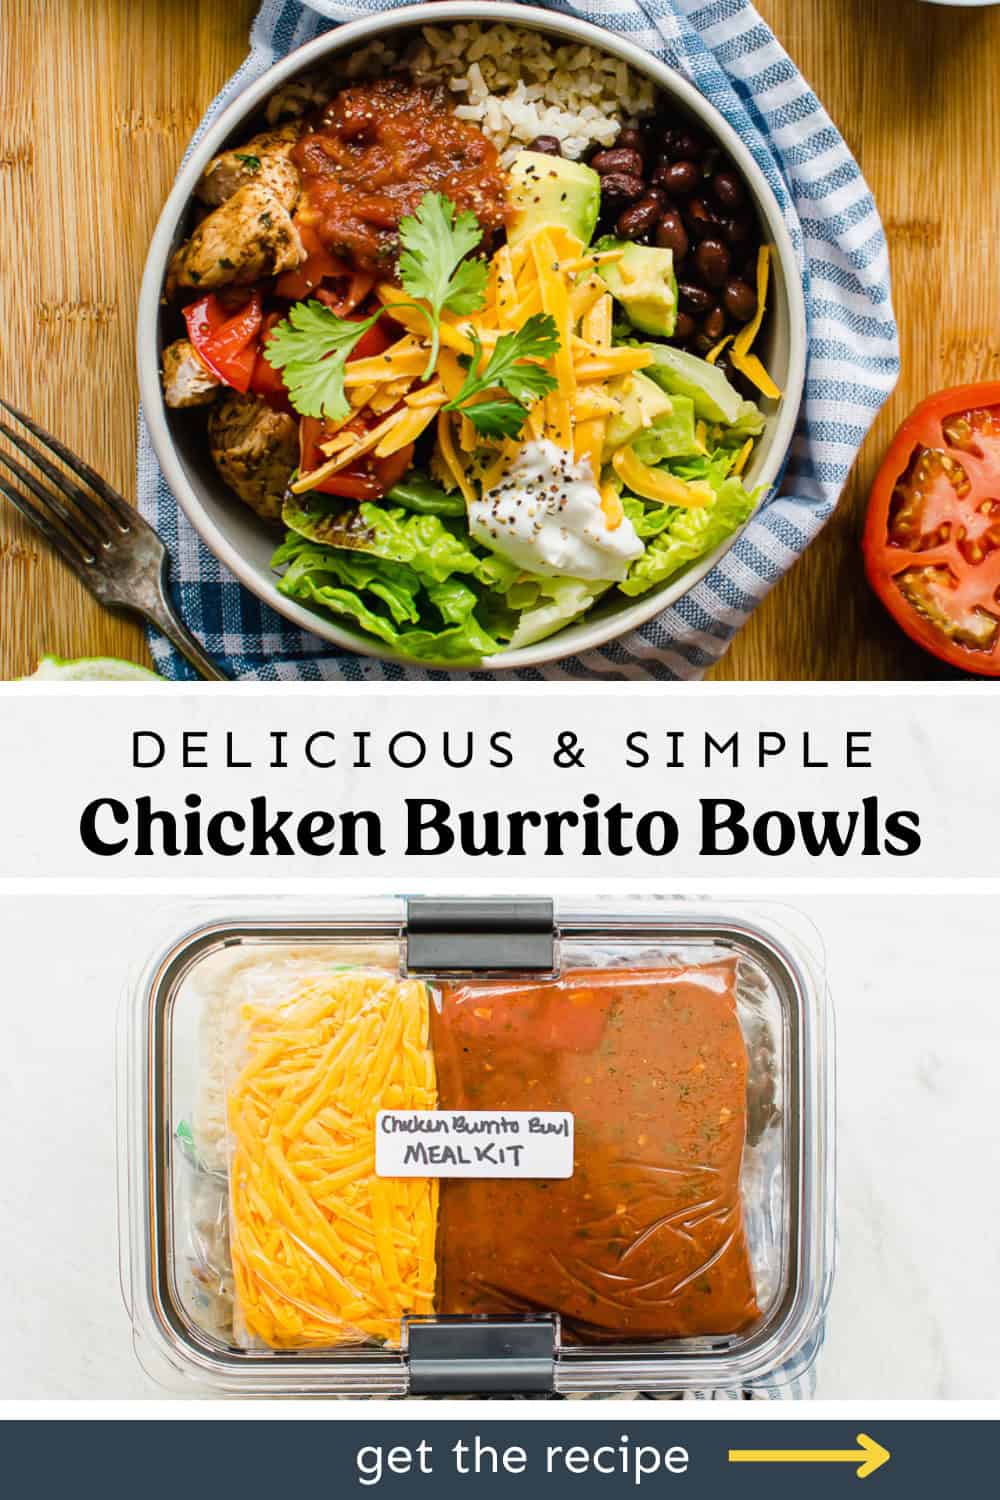 Two photos, top of a chicken burrito bowl and bottom of the ingredients packaged in freezer bags to make it a freezer meal.